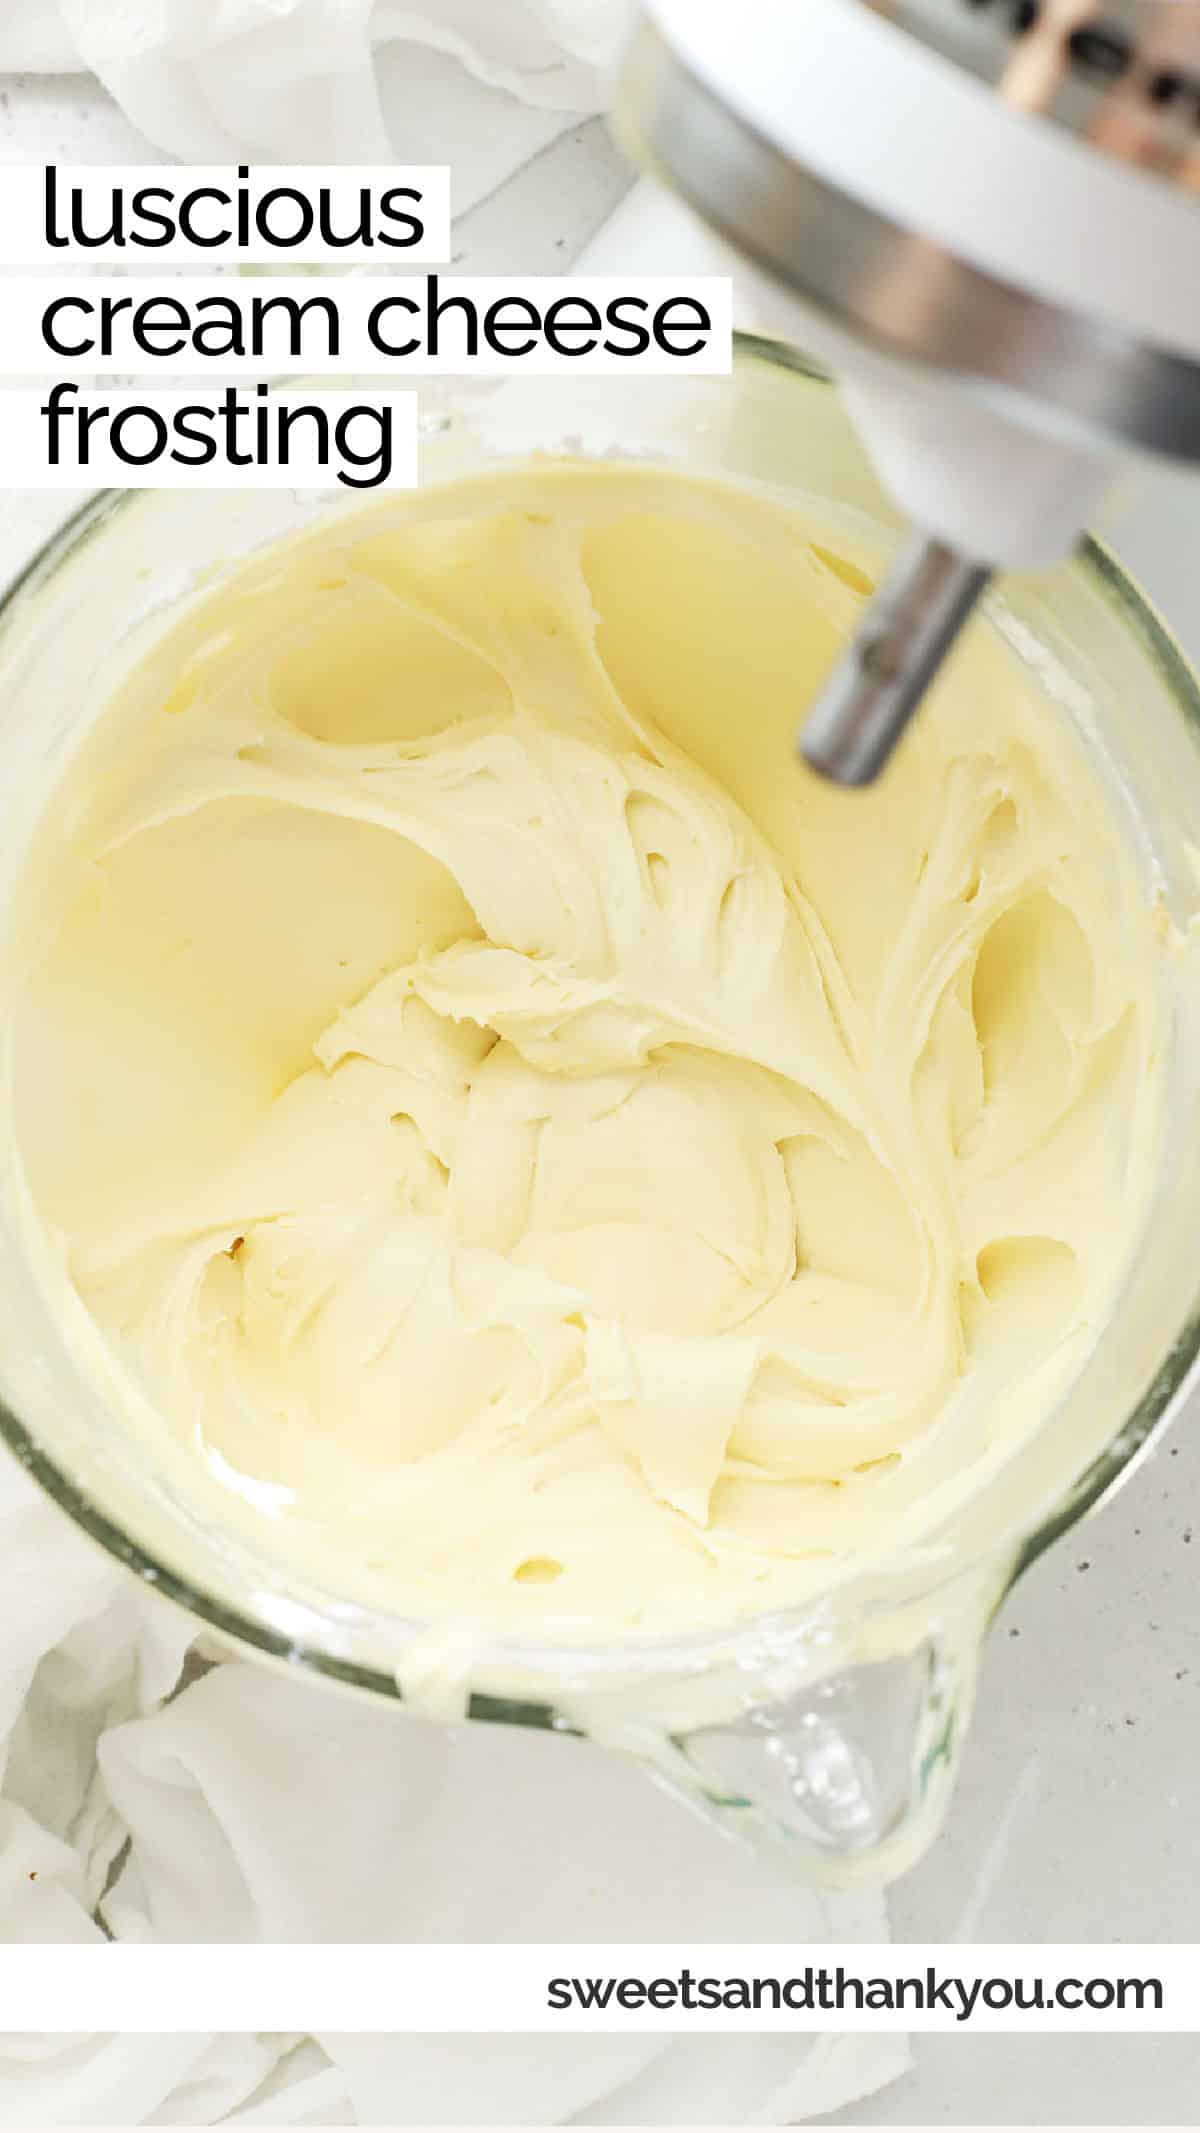 Our homemade cream cheese frosting recipe is naturally gluten-free, made from simple, delicious ingredients that taste delicious every time. It's the perfect pipeable cream cheese frosting for carrot cake, red velvet cake, pumpkin bars, cupcakes, and so much more. Get our tips for fluffy, smooth cream cheese frosting you can actually pipe, plus 10+ ways to use it in this post!